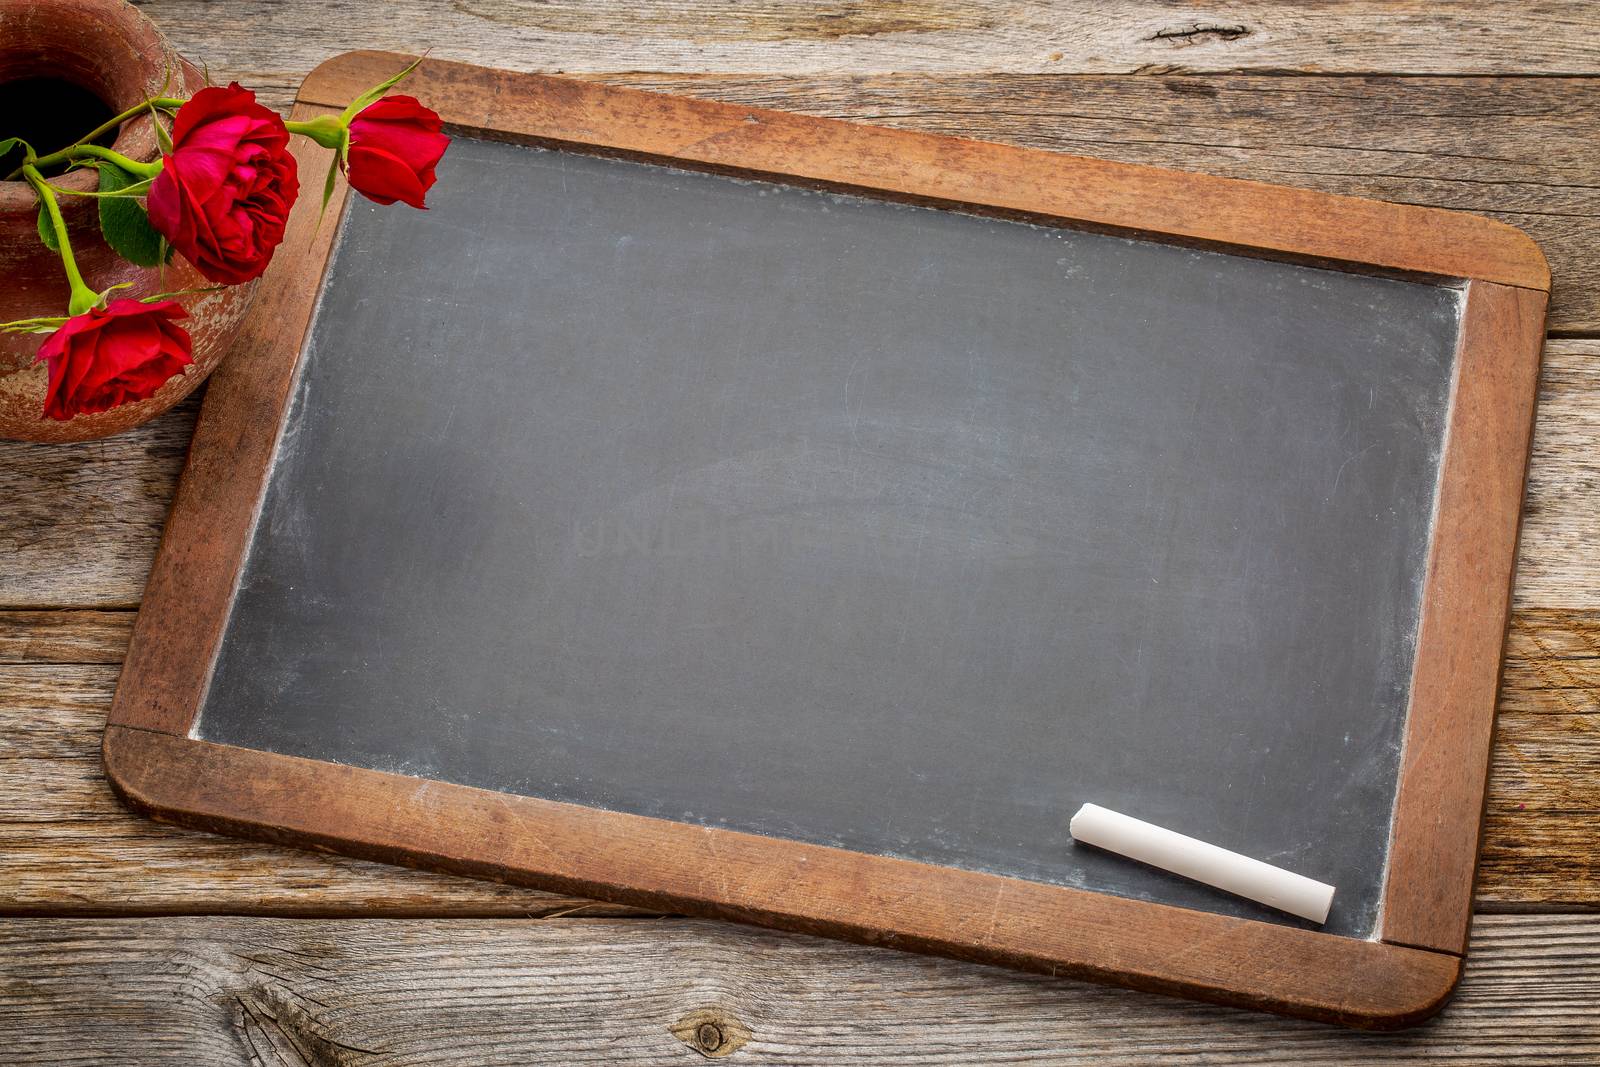 blank vintage slate  blackboard with white chalk and red roses against rustic wood